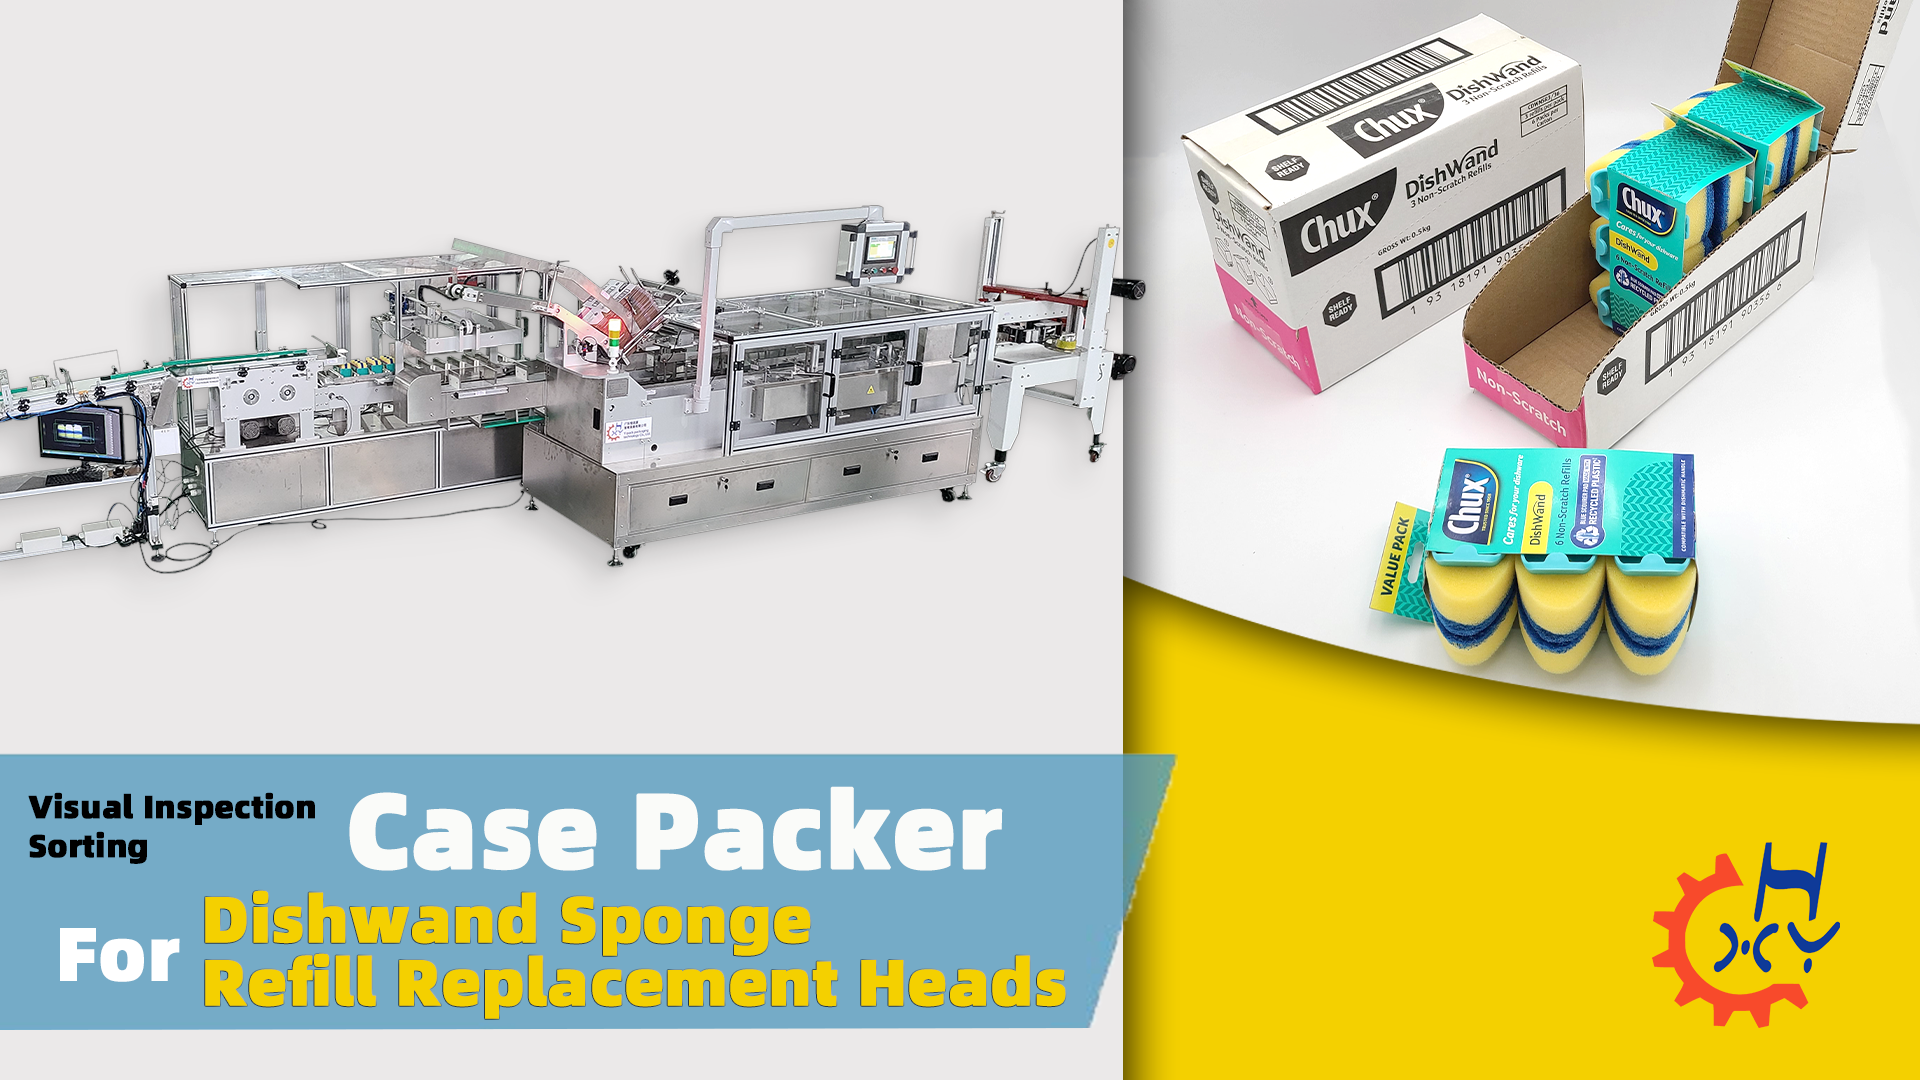 Visual Inspection Sorting Automatic Case Packer For Dishwand Sponge Refill Replacement Heads